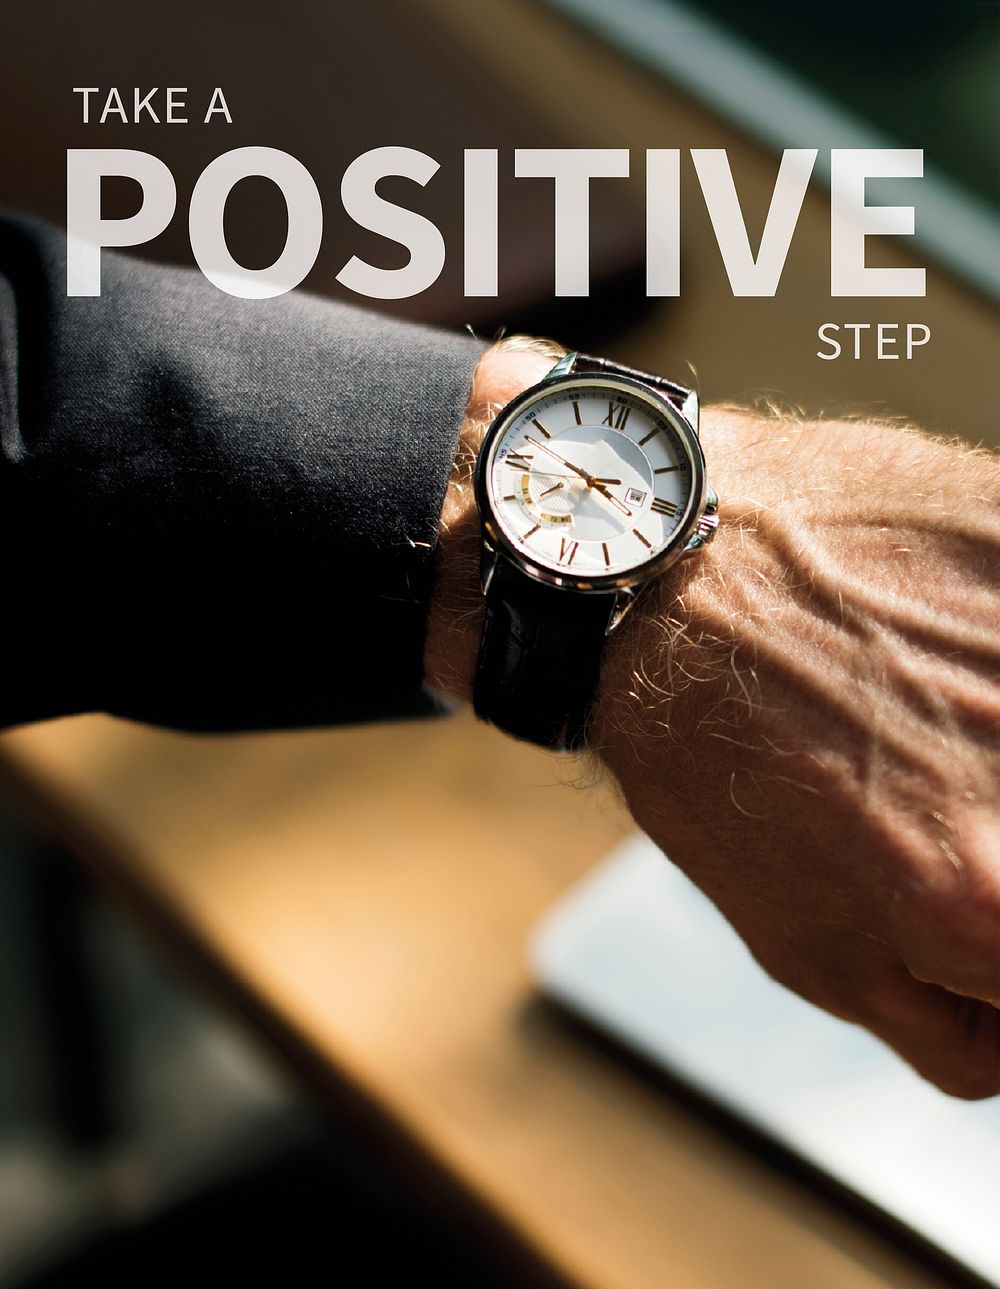 Positive step insurance for business liability ad poster